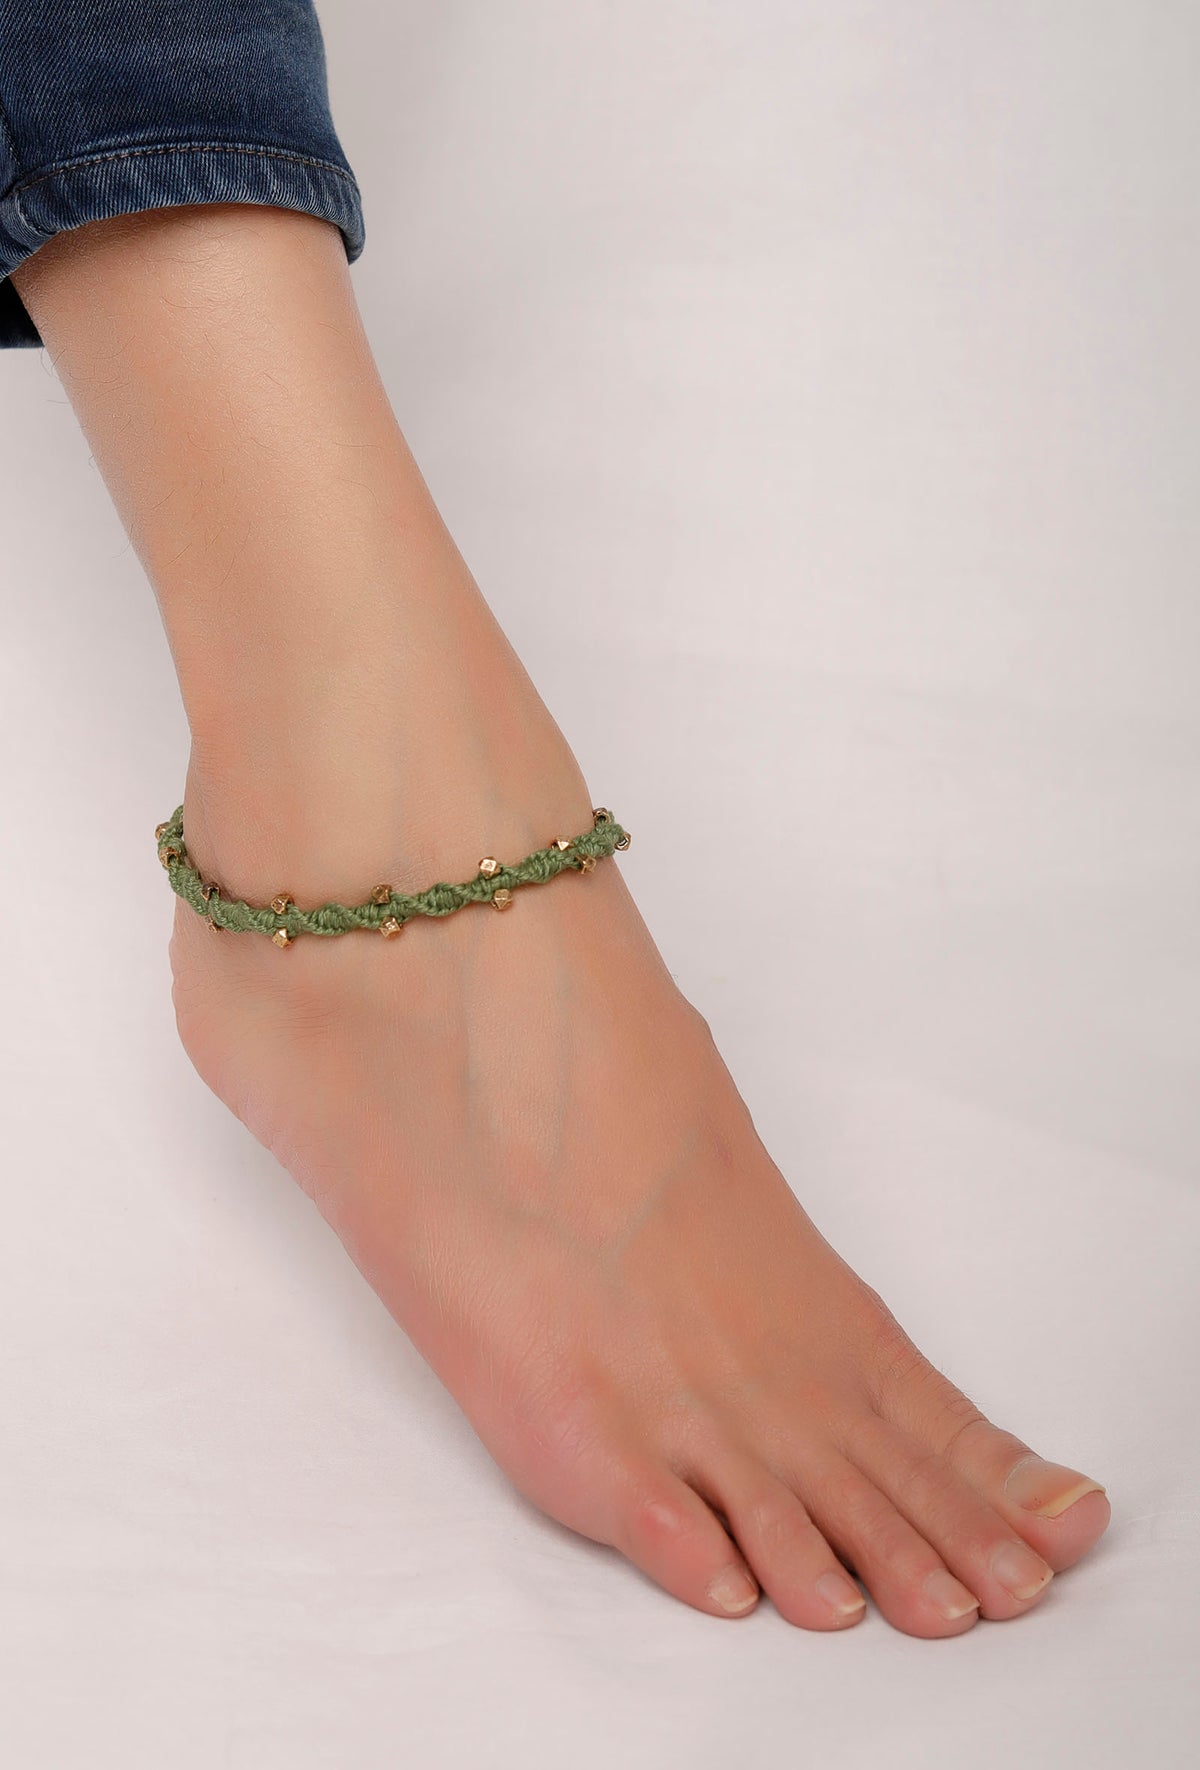 Sleek Sea Green with Beads Anklet